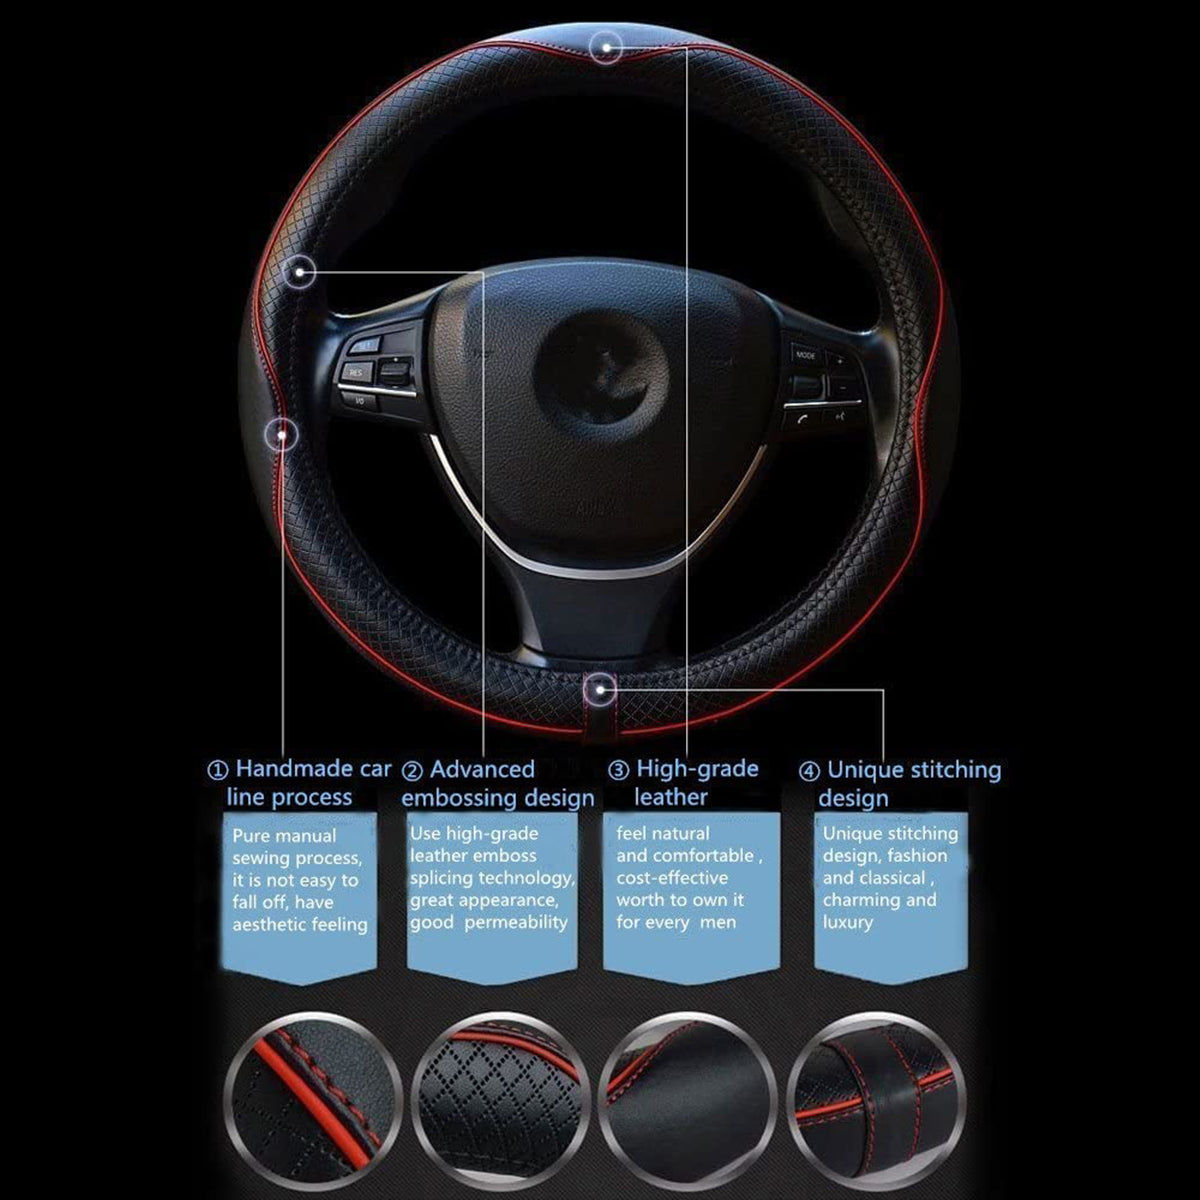 Car Steering Wheel Cover, Custom For Your Cars, Anti-Slip, Safety, Soft, Breathable, Heavy Duty, Thick, Full Surround, Sports Style, Car Accessories AR18990